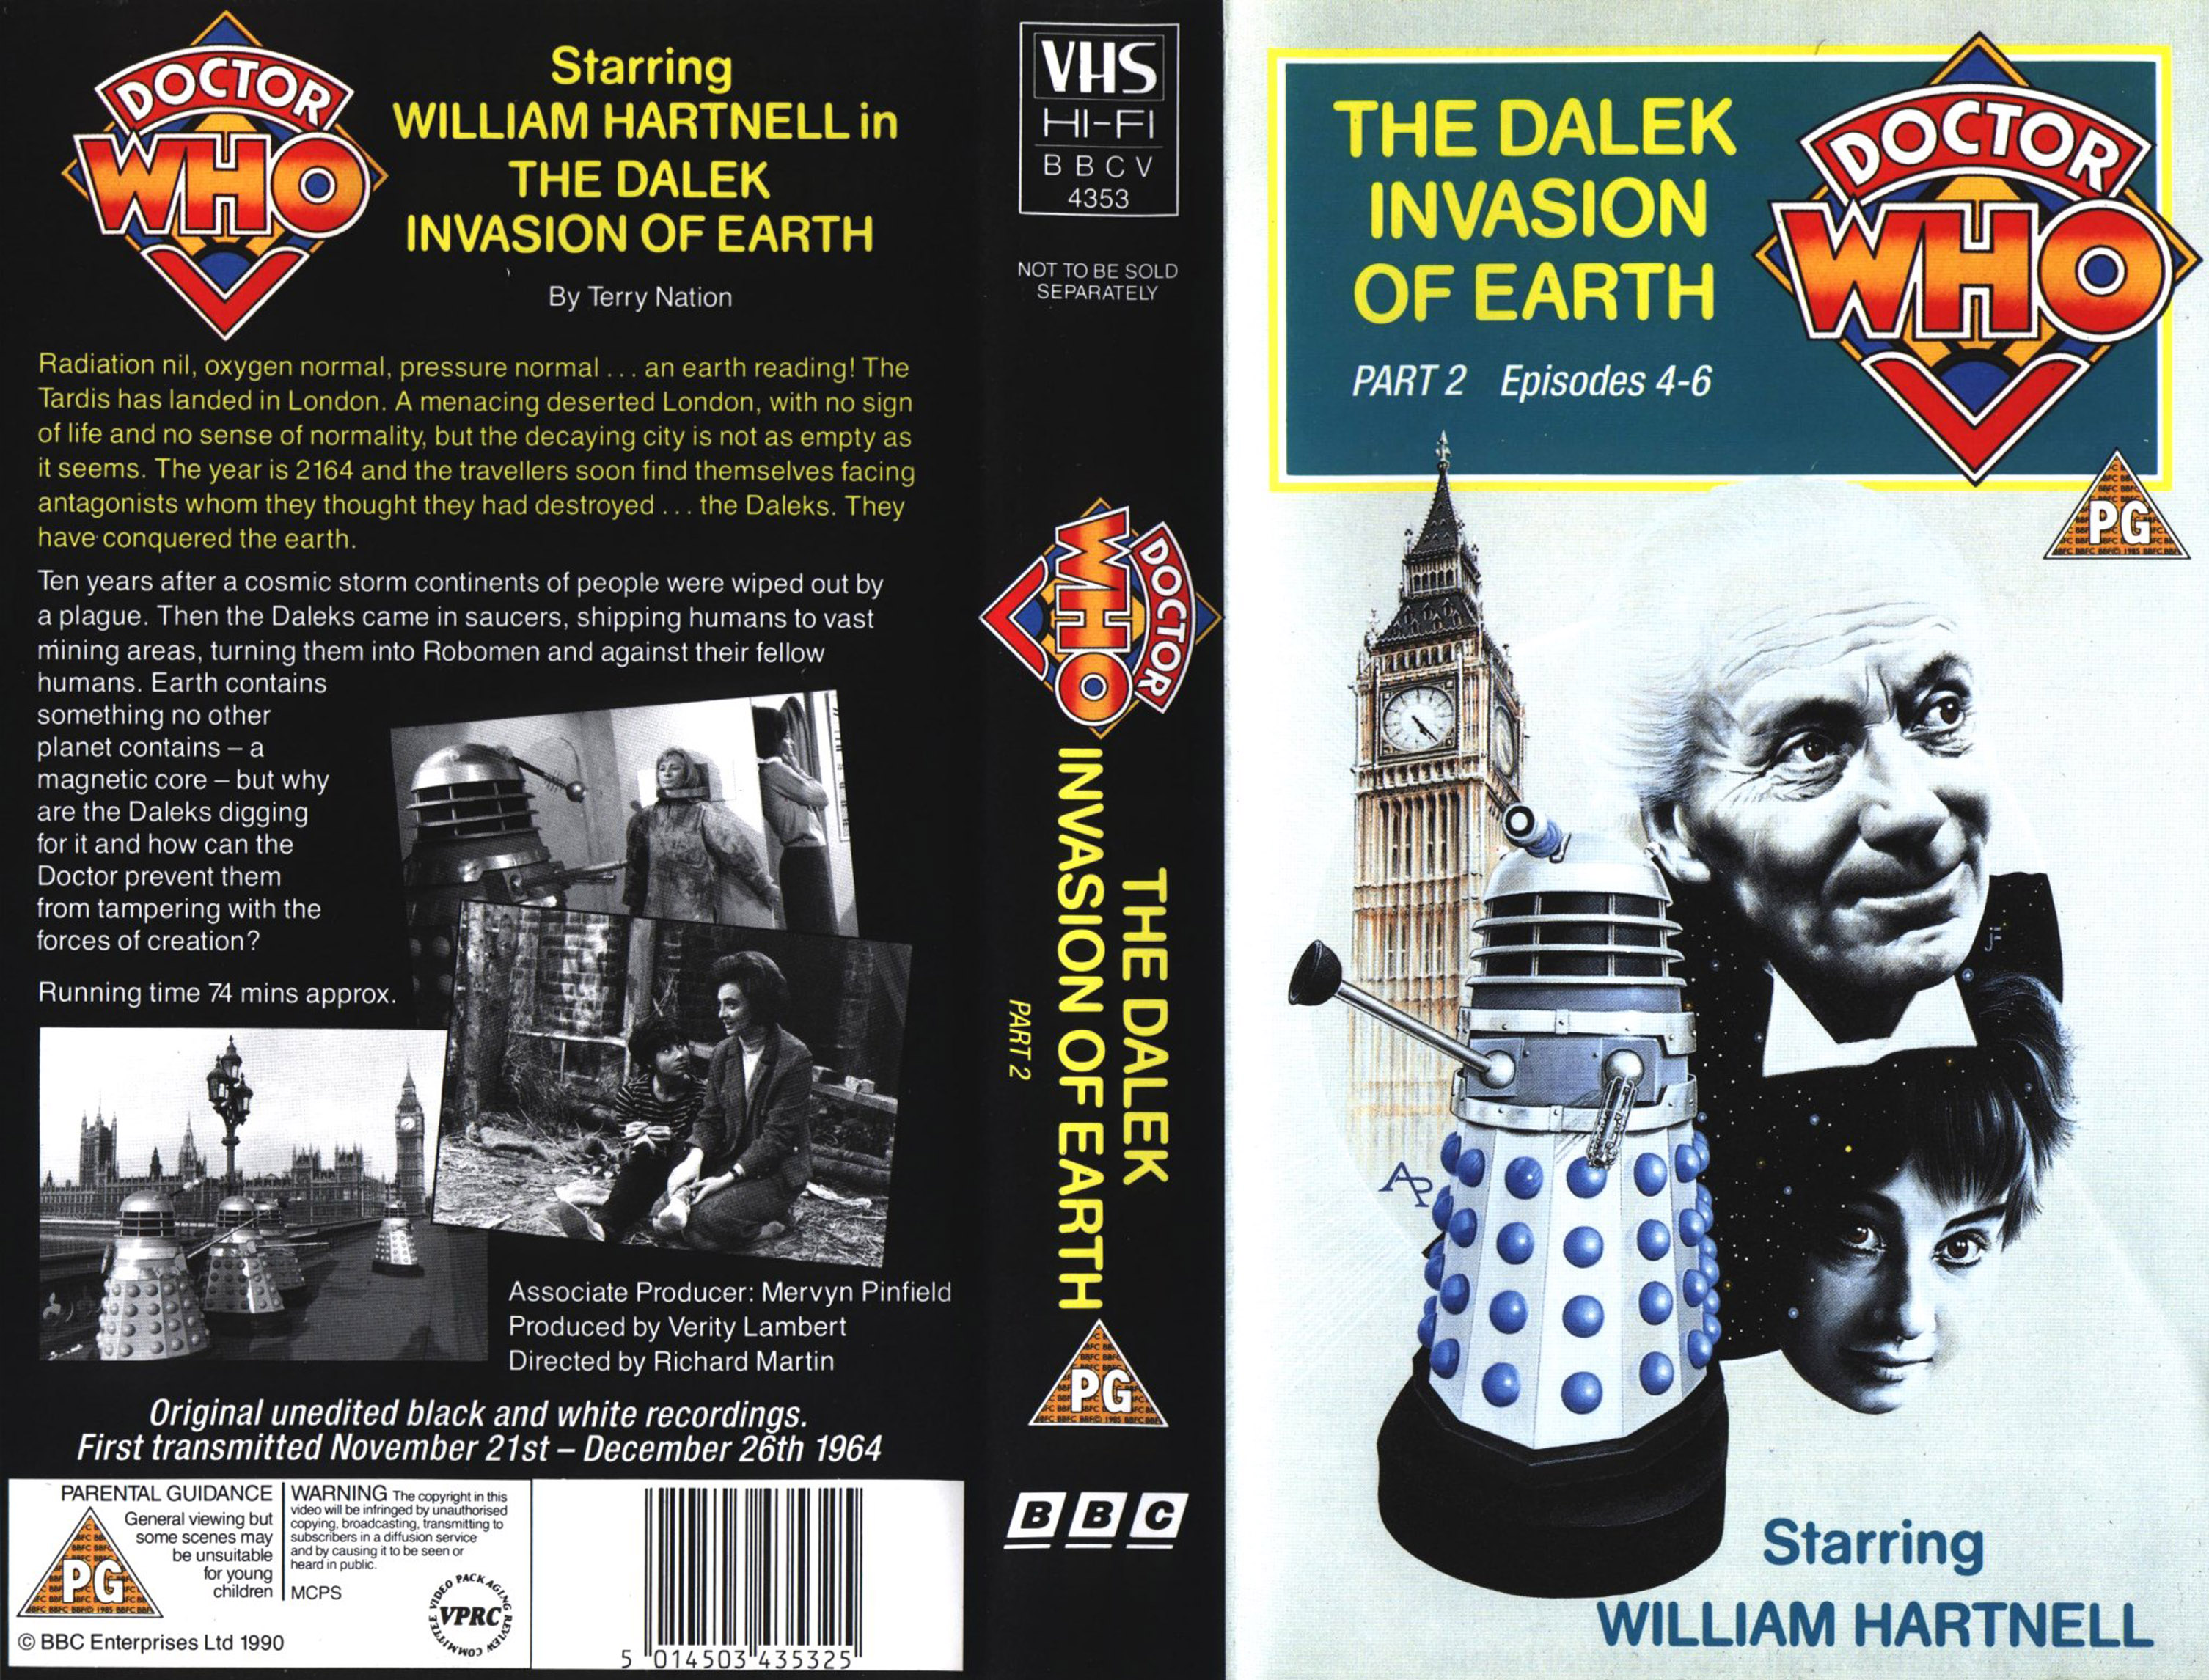 The Dalek Invasion of Earth VHS